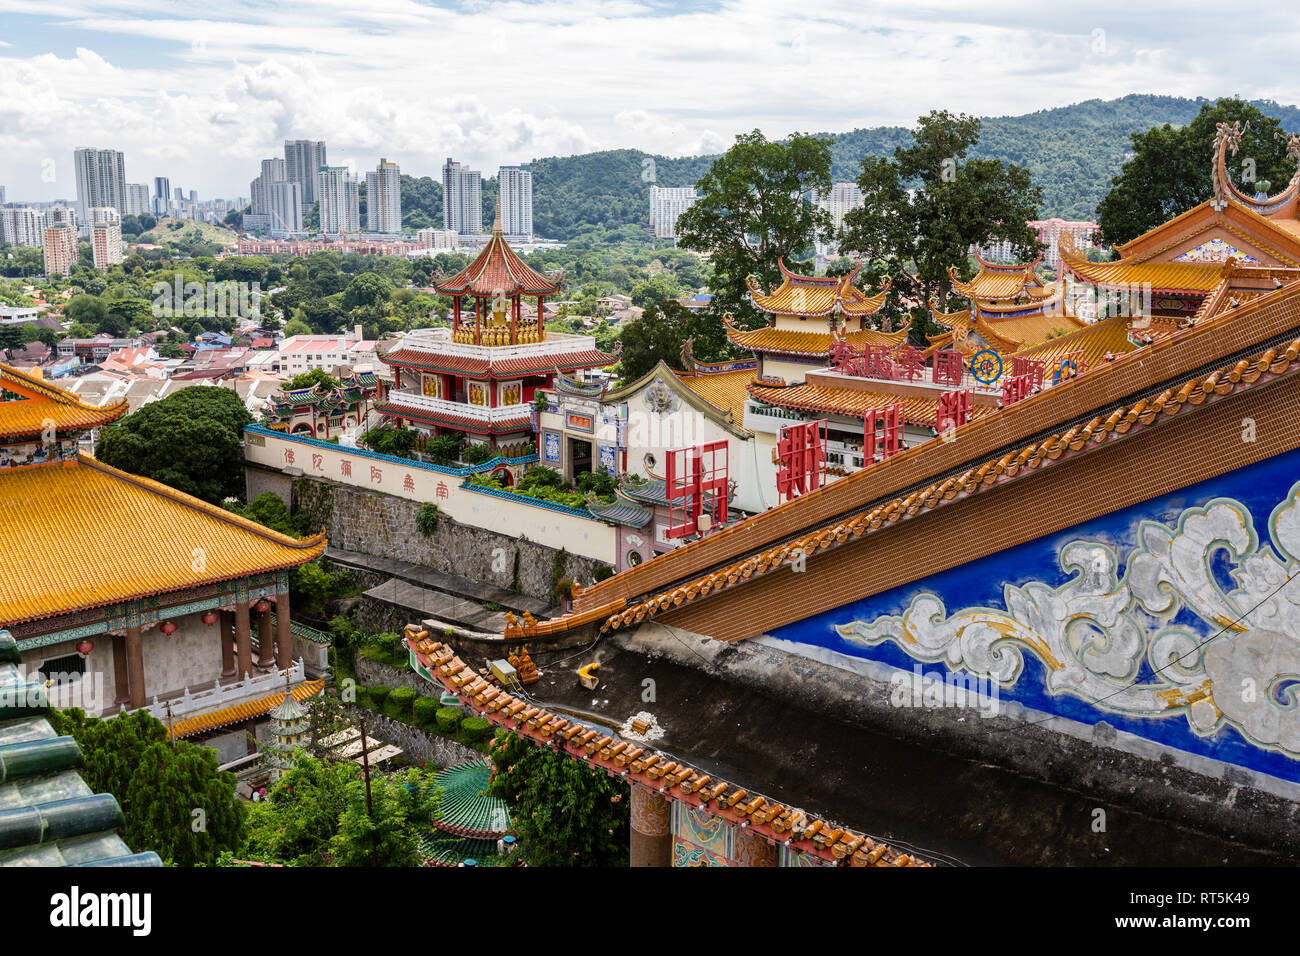 View of Kek Lok Si Buddhist Temple from Ban Po Thar Pagoda, George Town, Penang, Malaysia, in background. Stock Photo